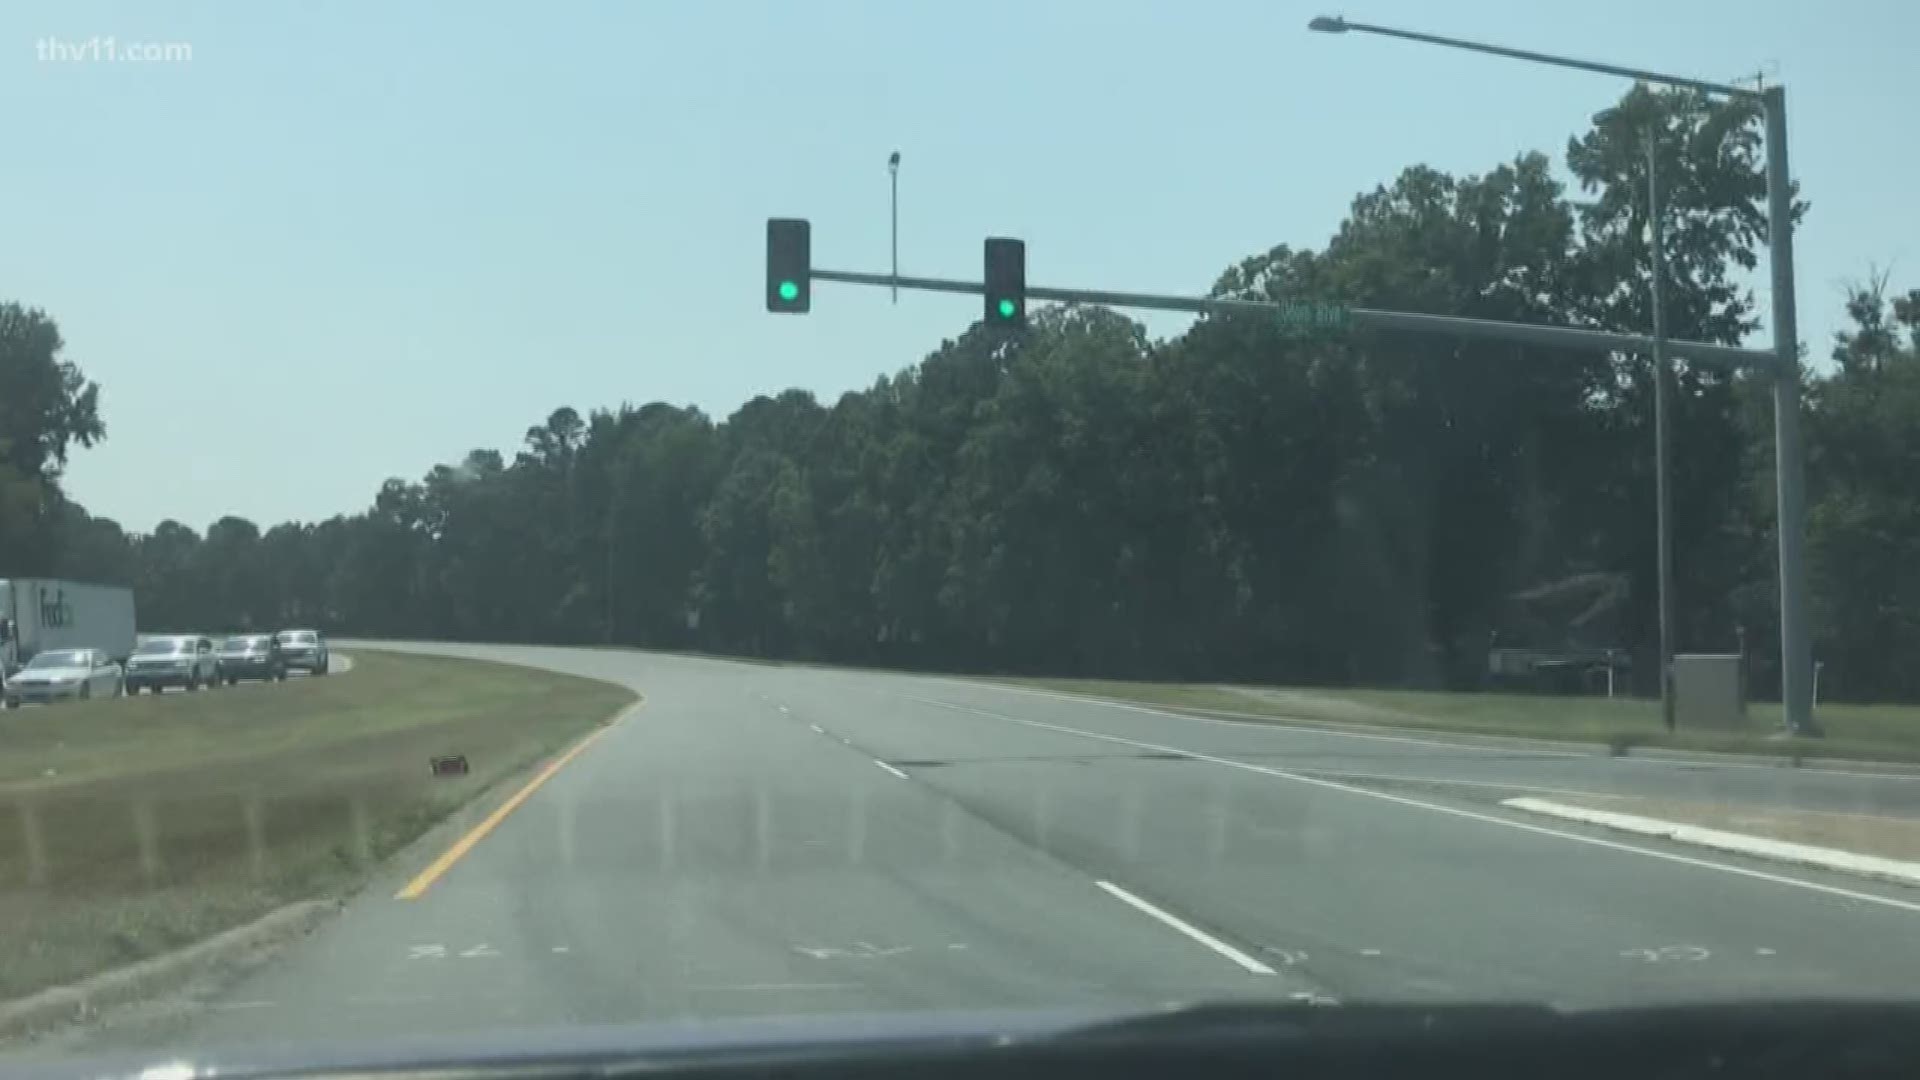 Most drivers in Maumelle can agree on one thing: the traffic signals can bring their plans to a halt.